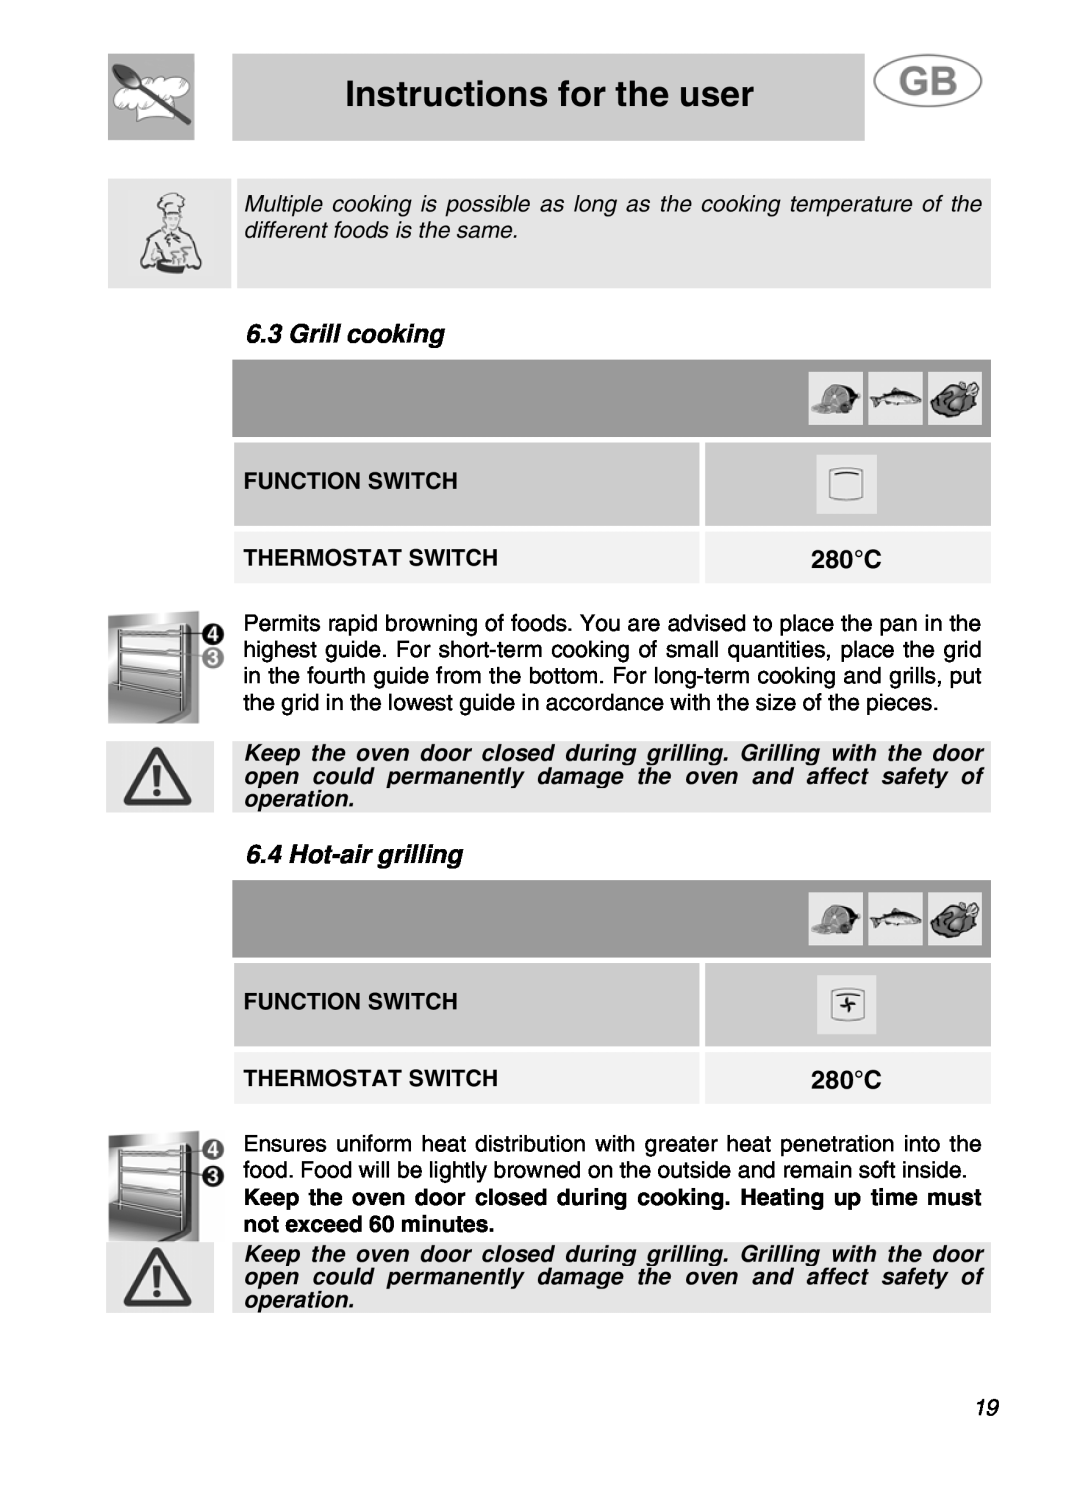 Smeg JRP30GIBB manual Grill cooking, 280C, Hot-air grilling, Instructions for the user, Function Switch, Thermostat Switch 